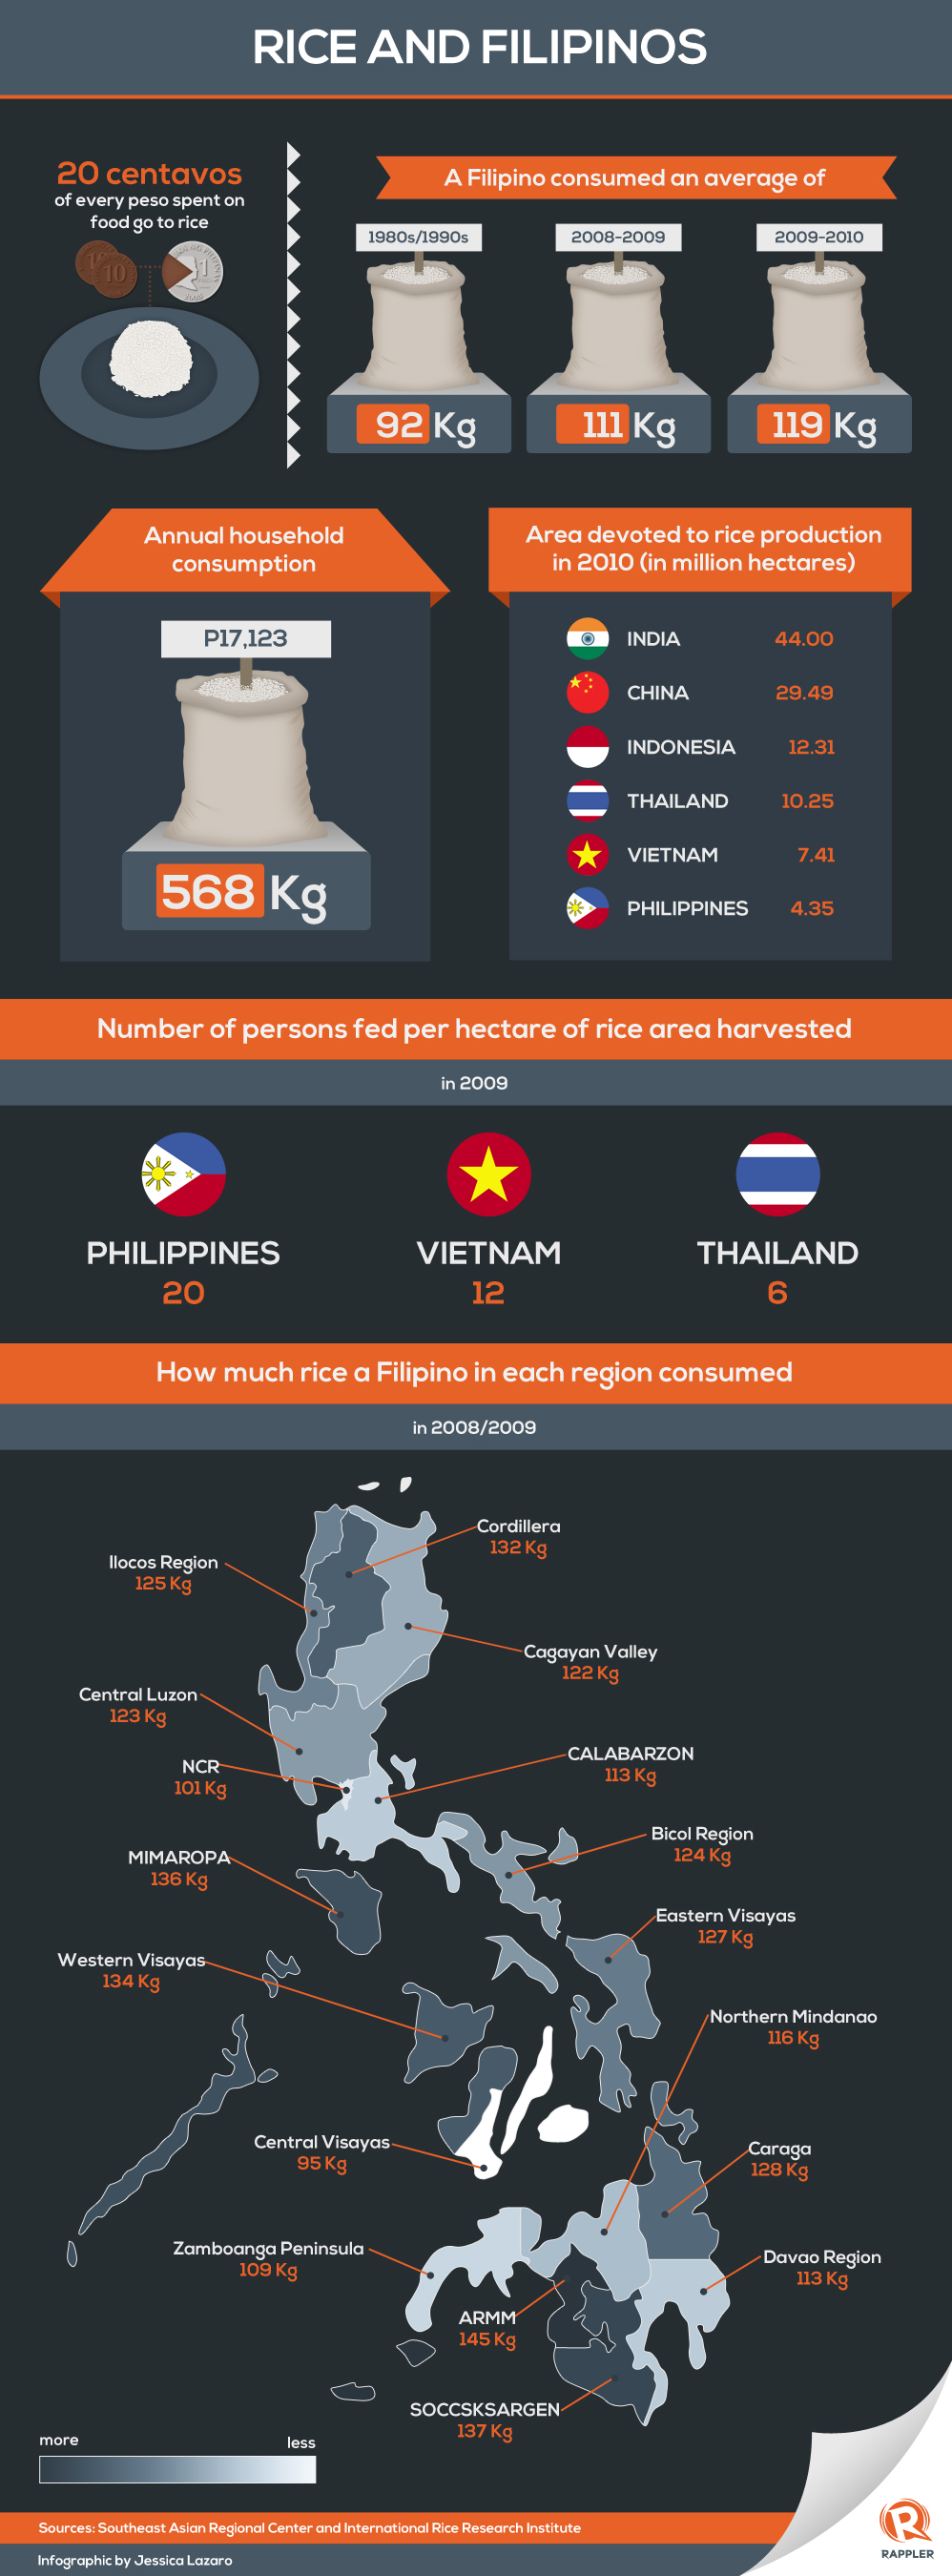 How Much Rice Do Filipinos Consume? (Infographic)